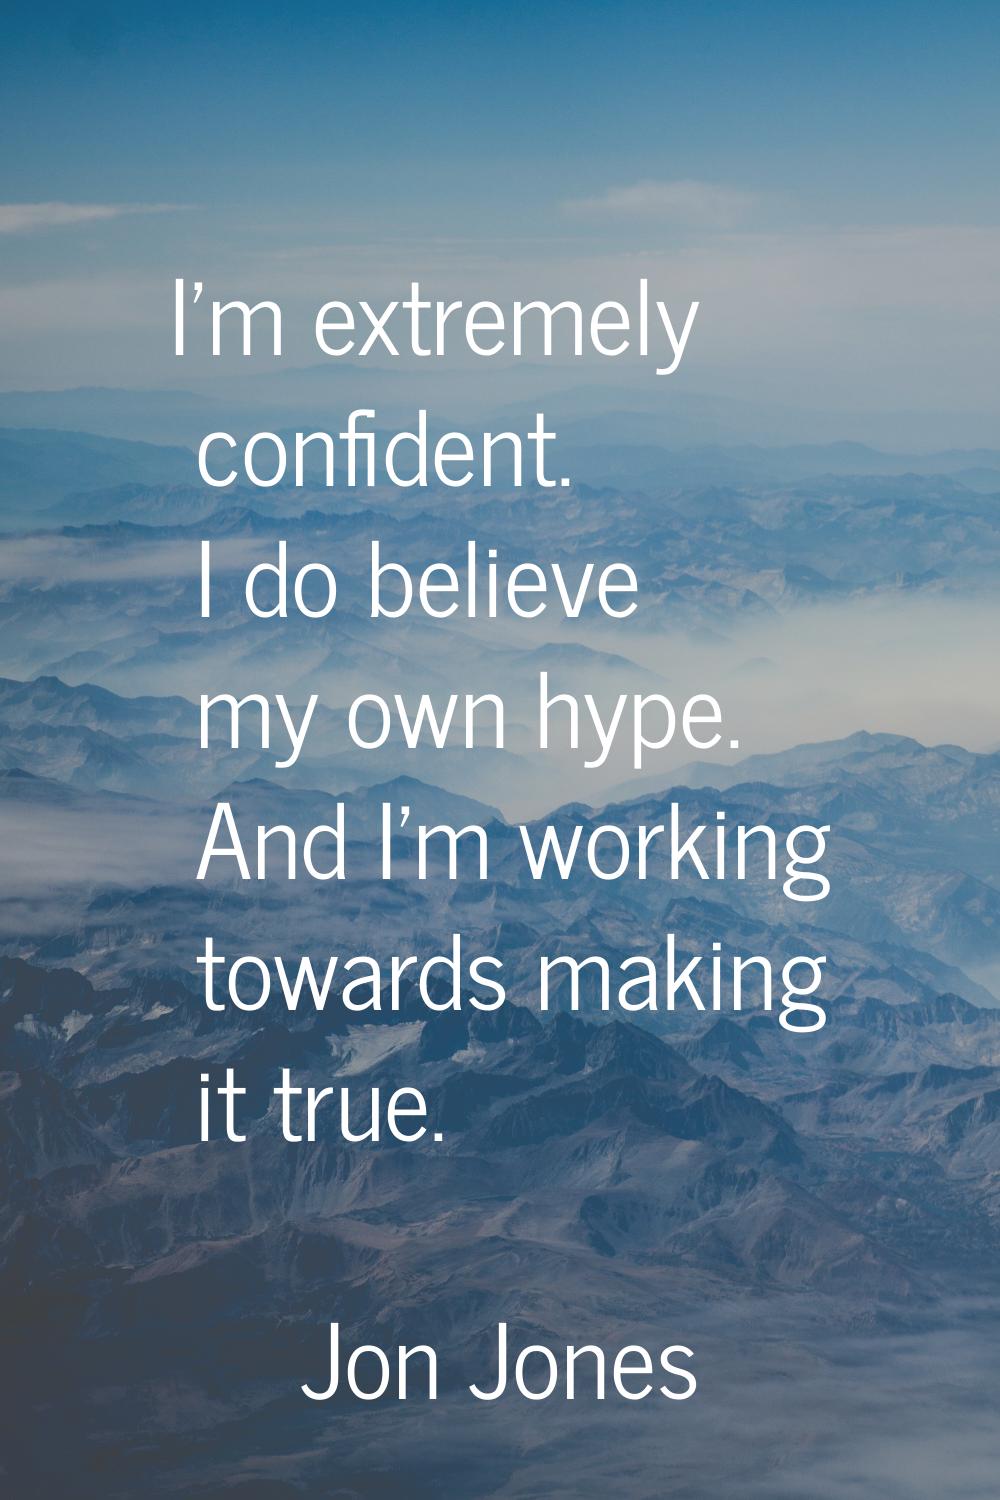 I'm extremely confident. I do believe my own hype. And I'm working towards making it true.